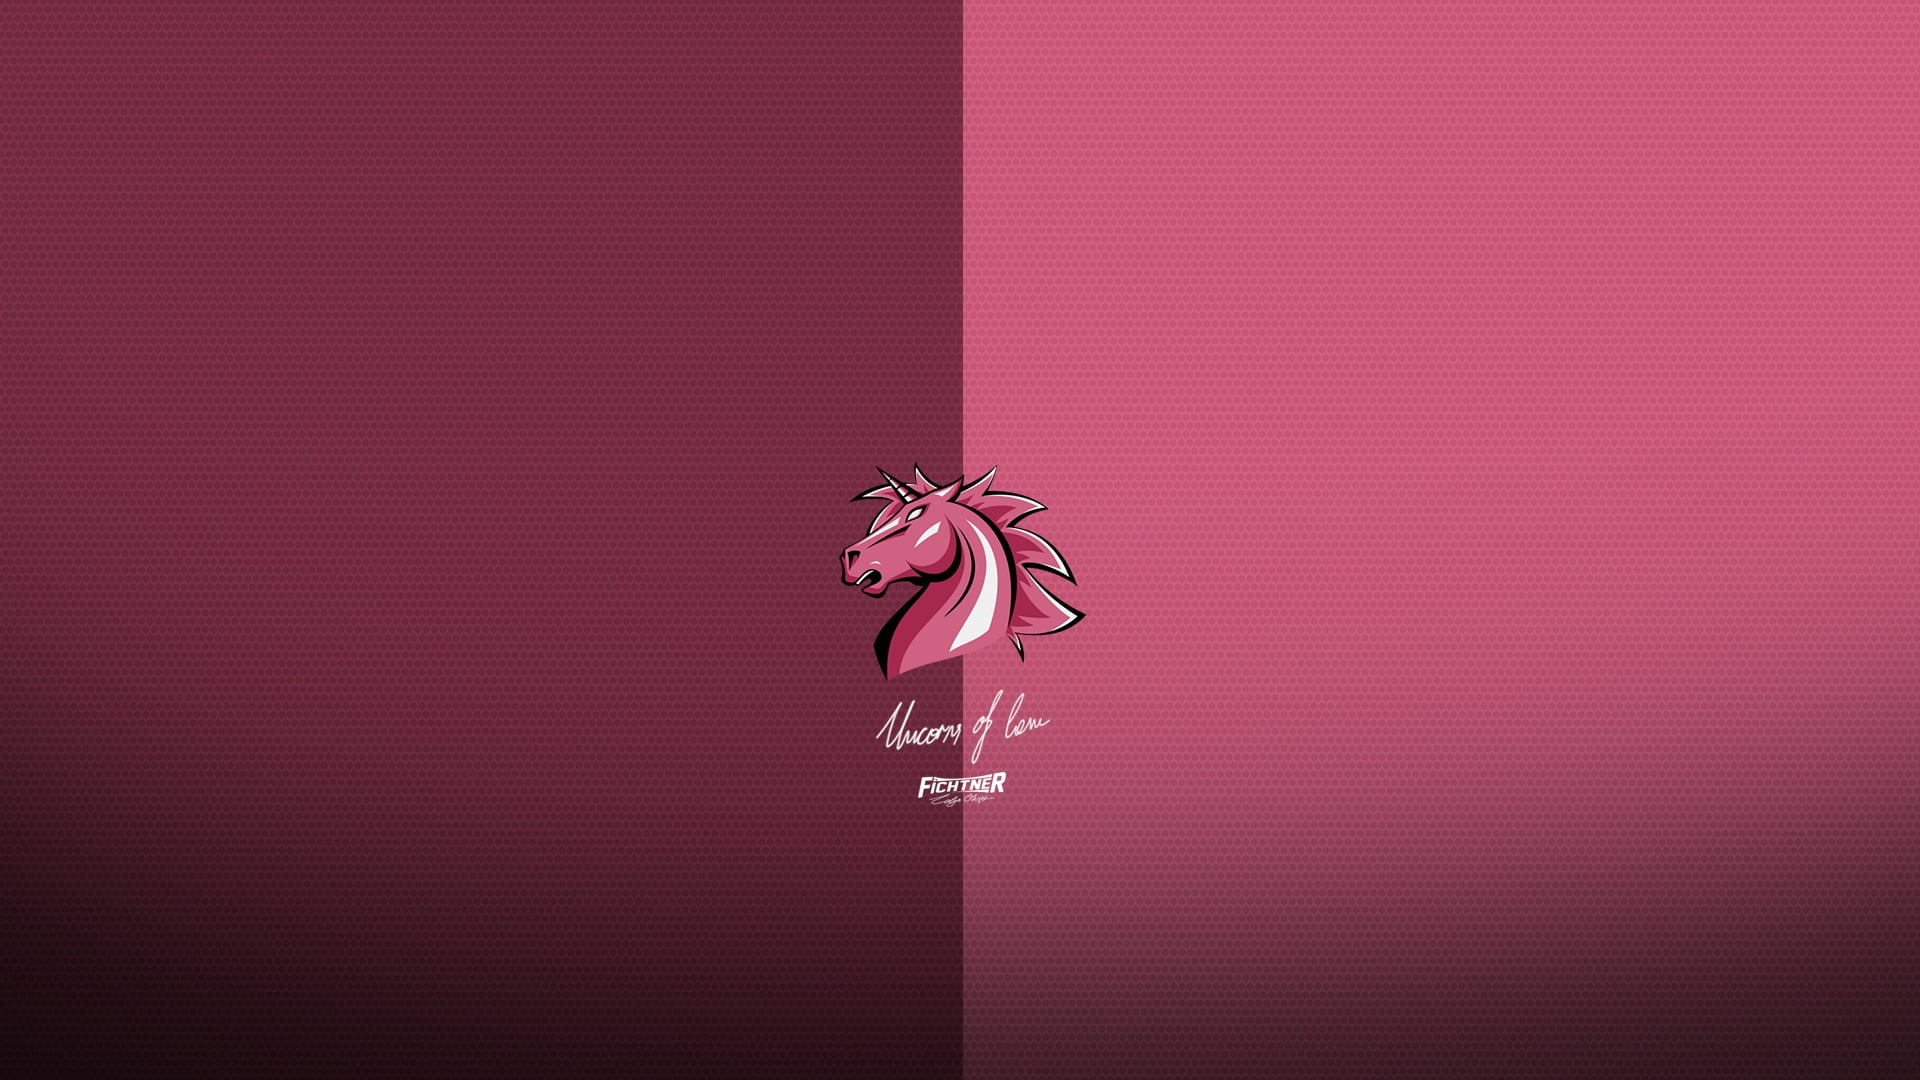 Unicorns of love, e-sports, pink color, indoors, no people